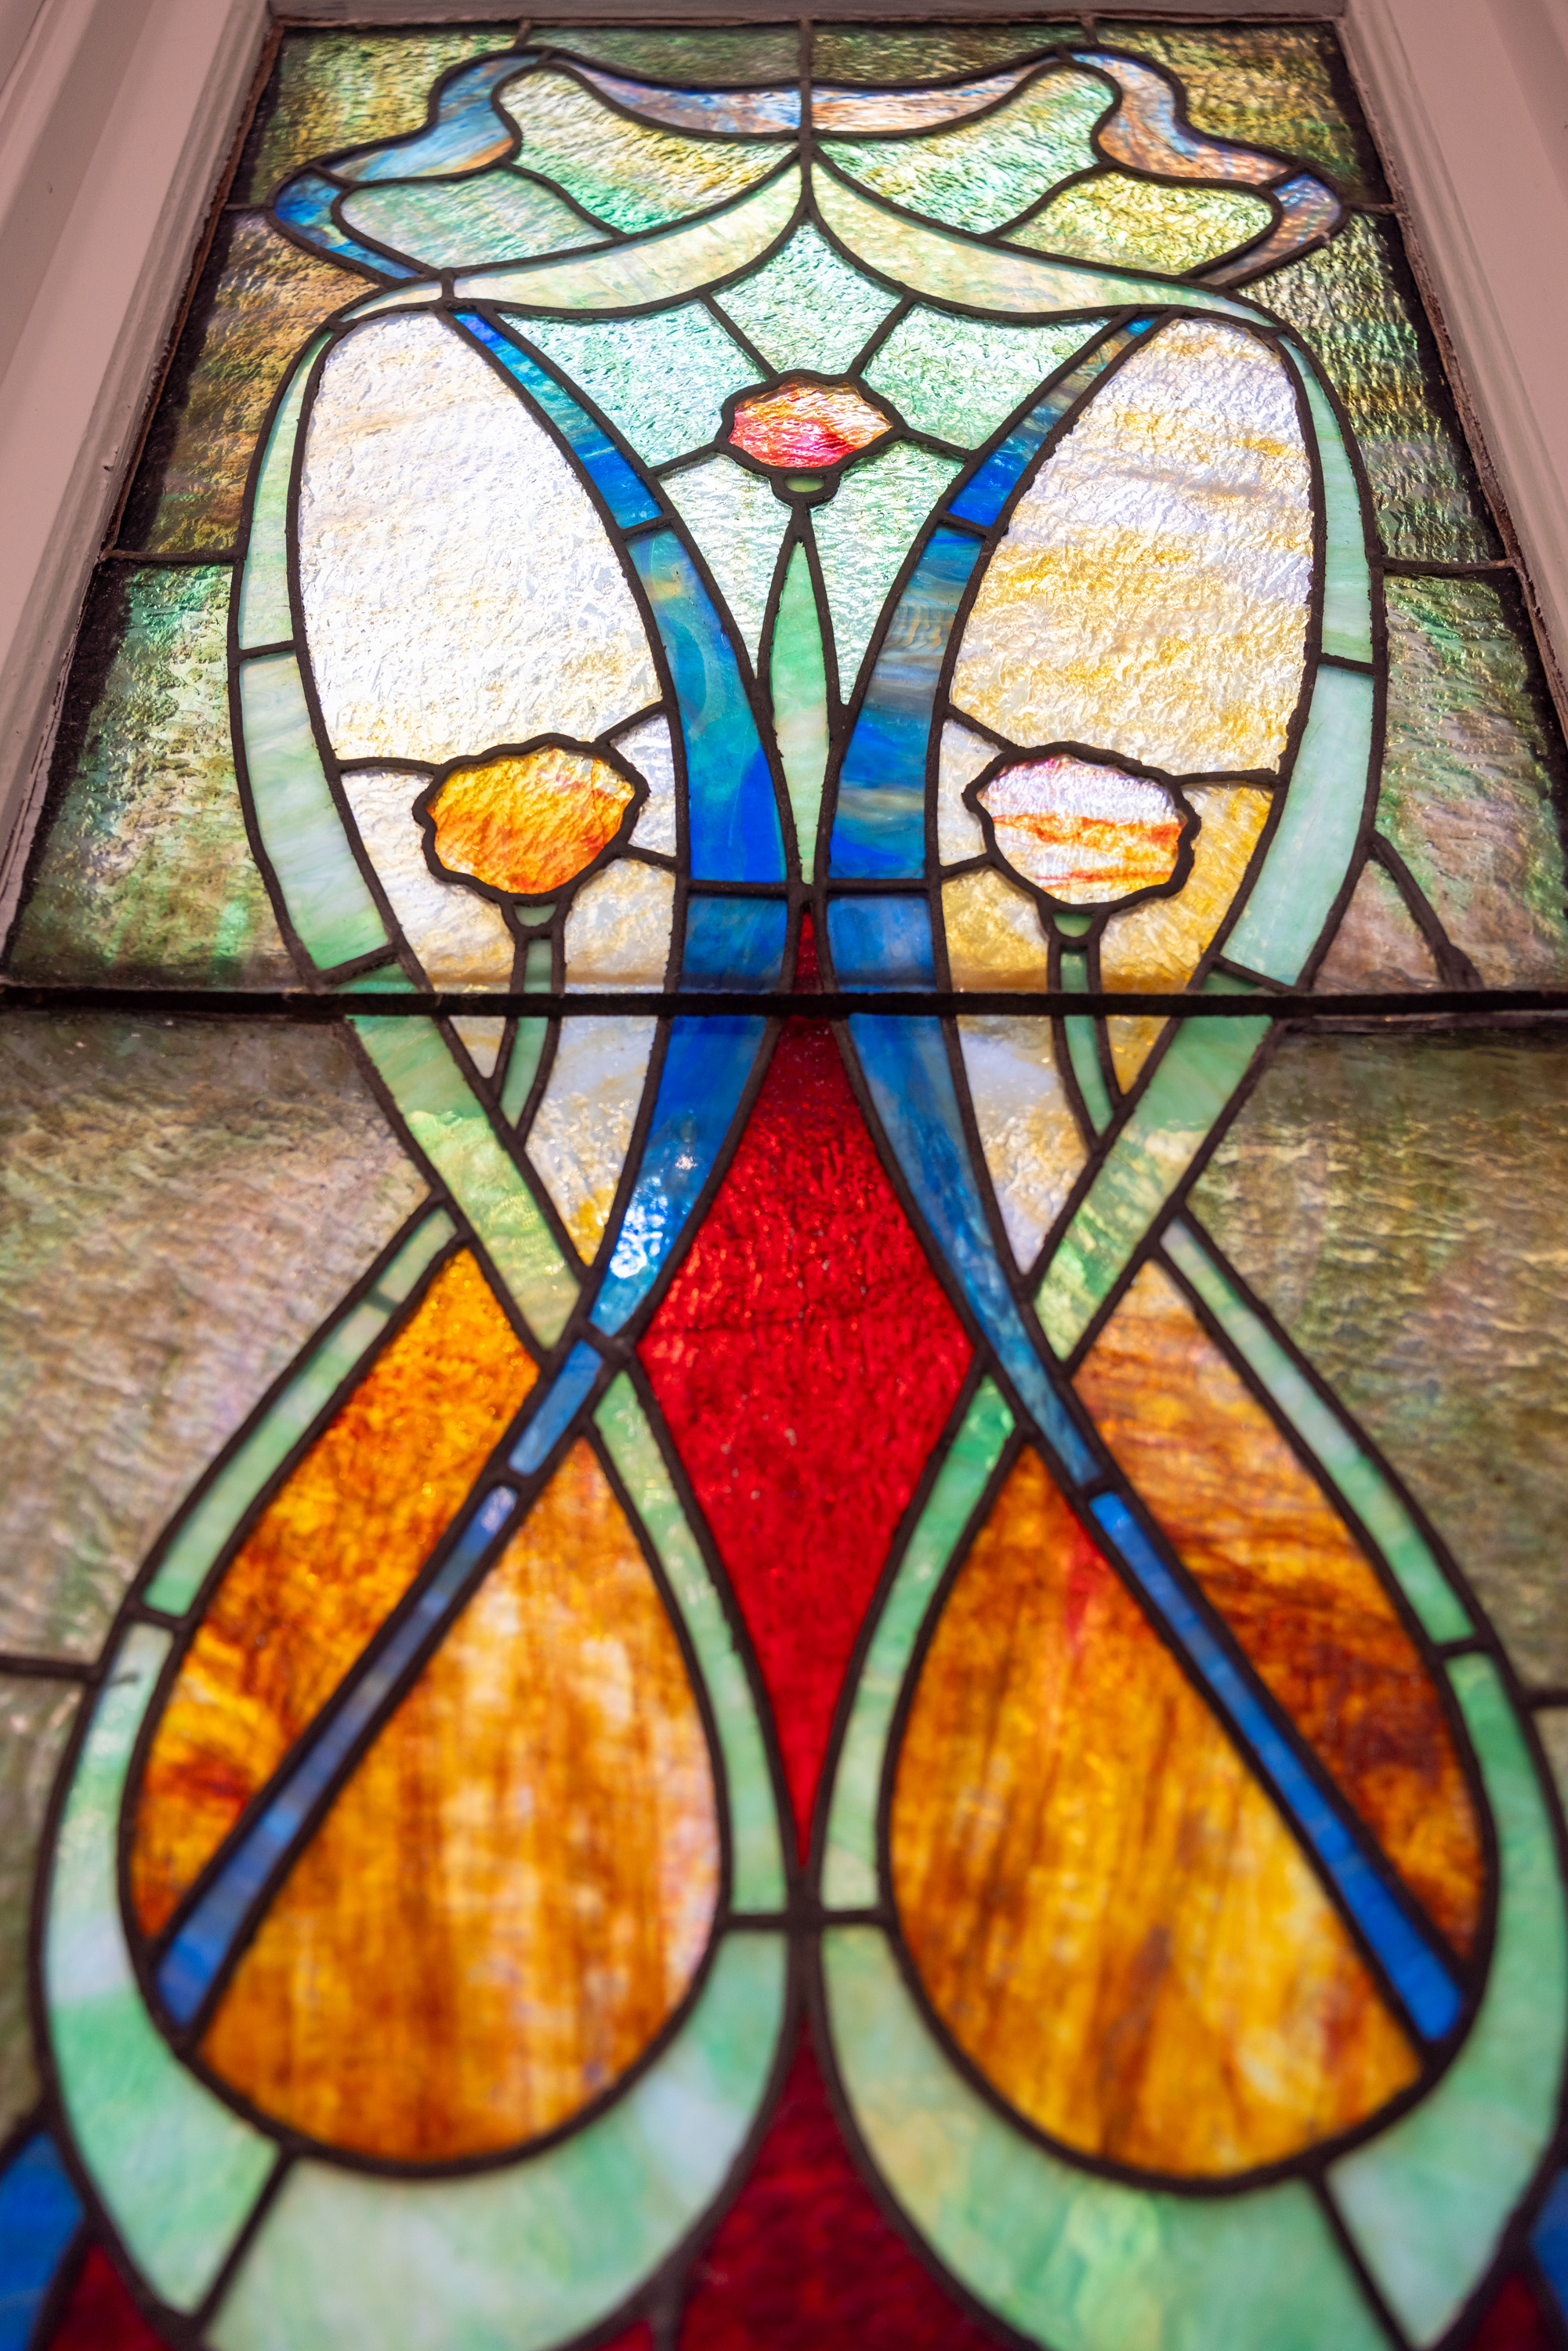 This image shows a colorful stained-glass window with an intricate floral design in shades of red, yellow, green, and blue, set in a wooden frame.